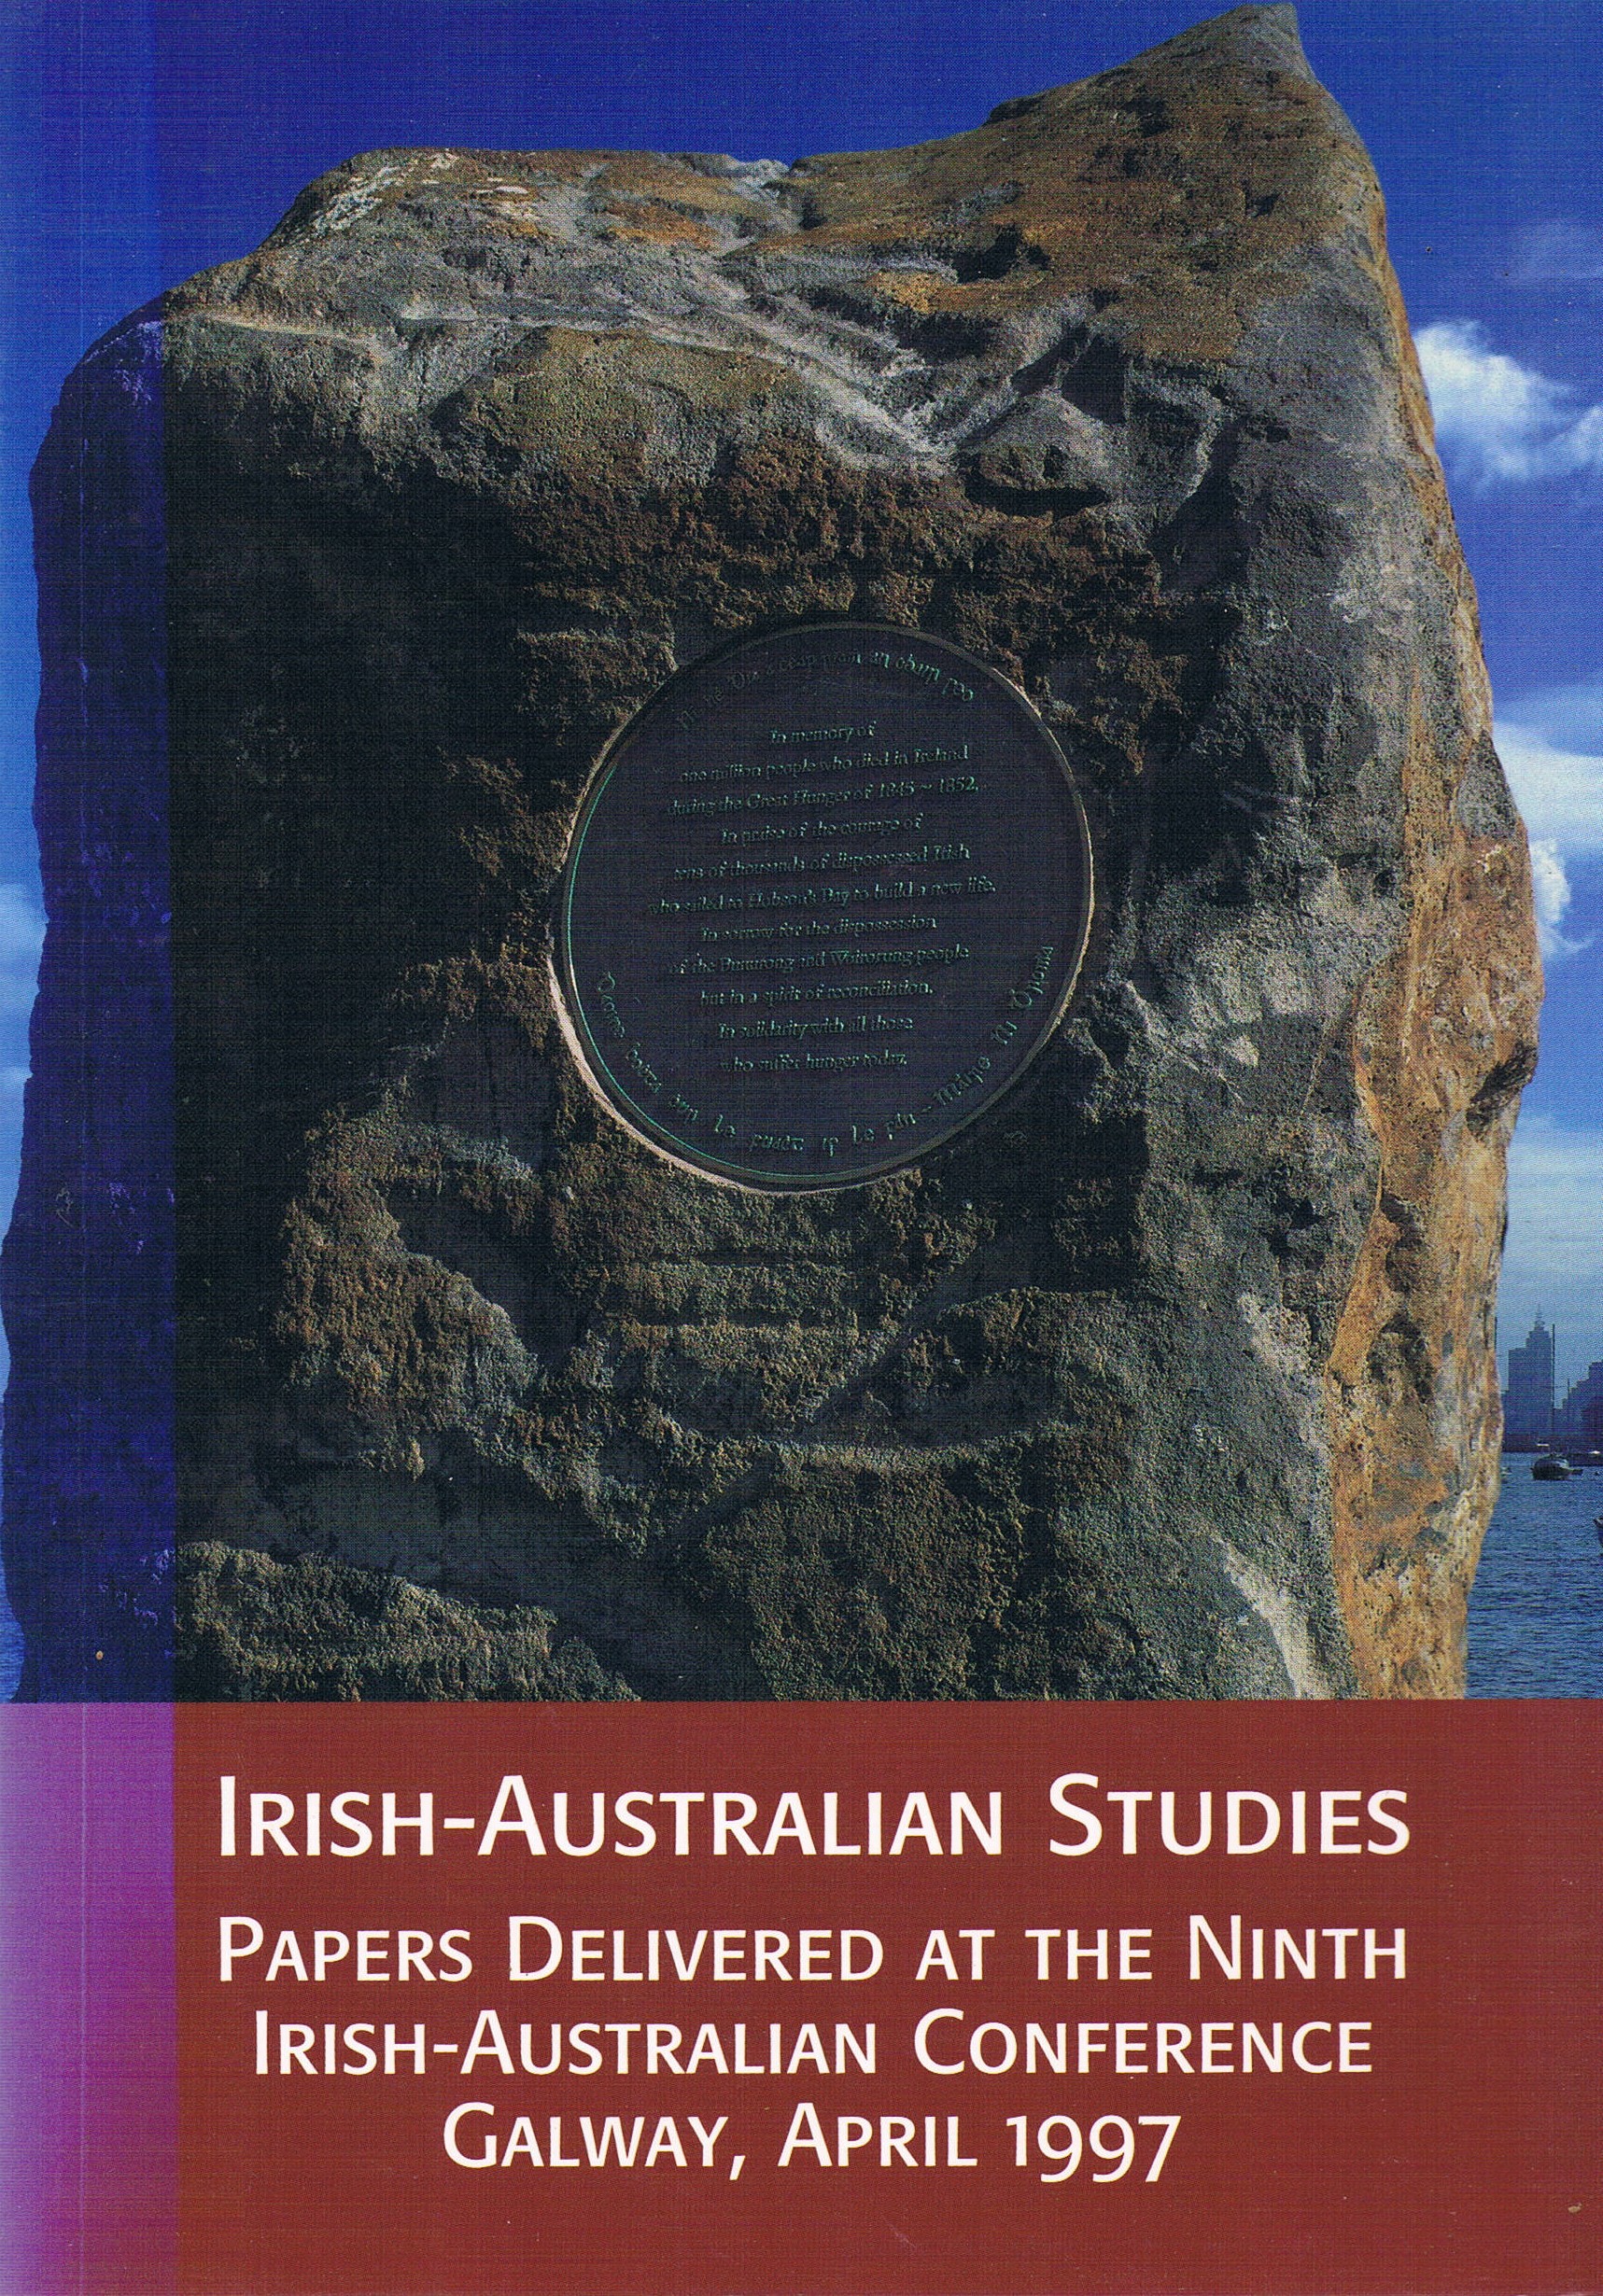 Irish-Australian Studies: Papers Delivered At The Ninth Irish-Australian Conference Galway, April 1997 | Tadhg Foley & Fiona Bateman | Charlie Byrne's